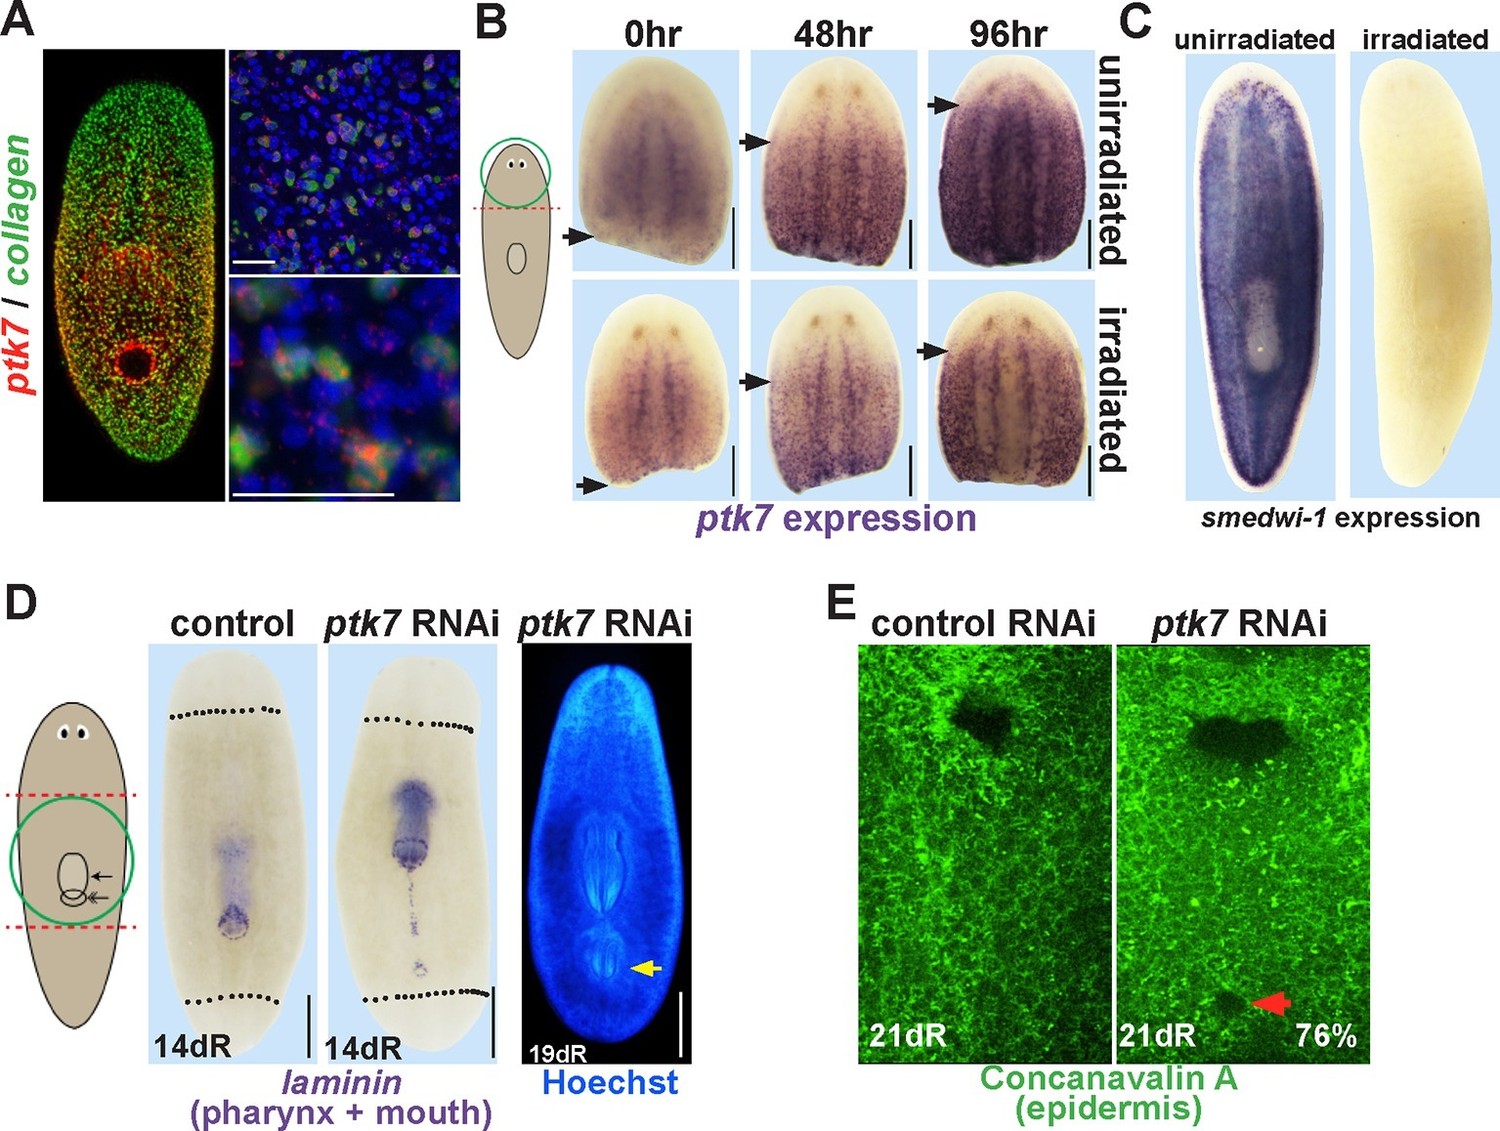 Wnt, Ptk7, and FGFRL expression gradients control trunk positional